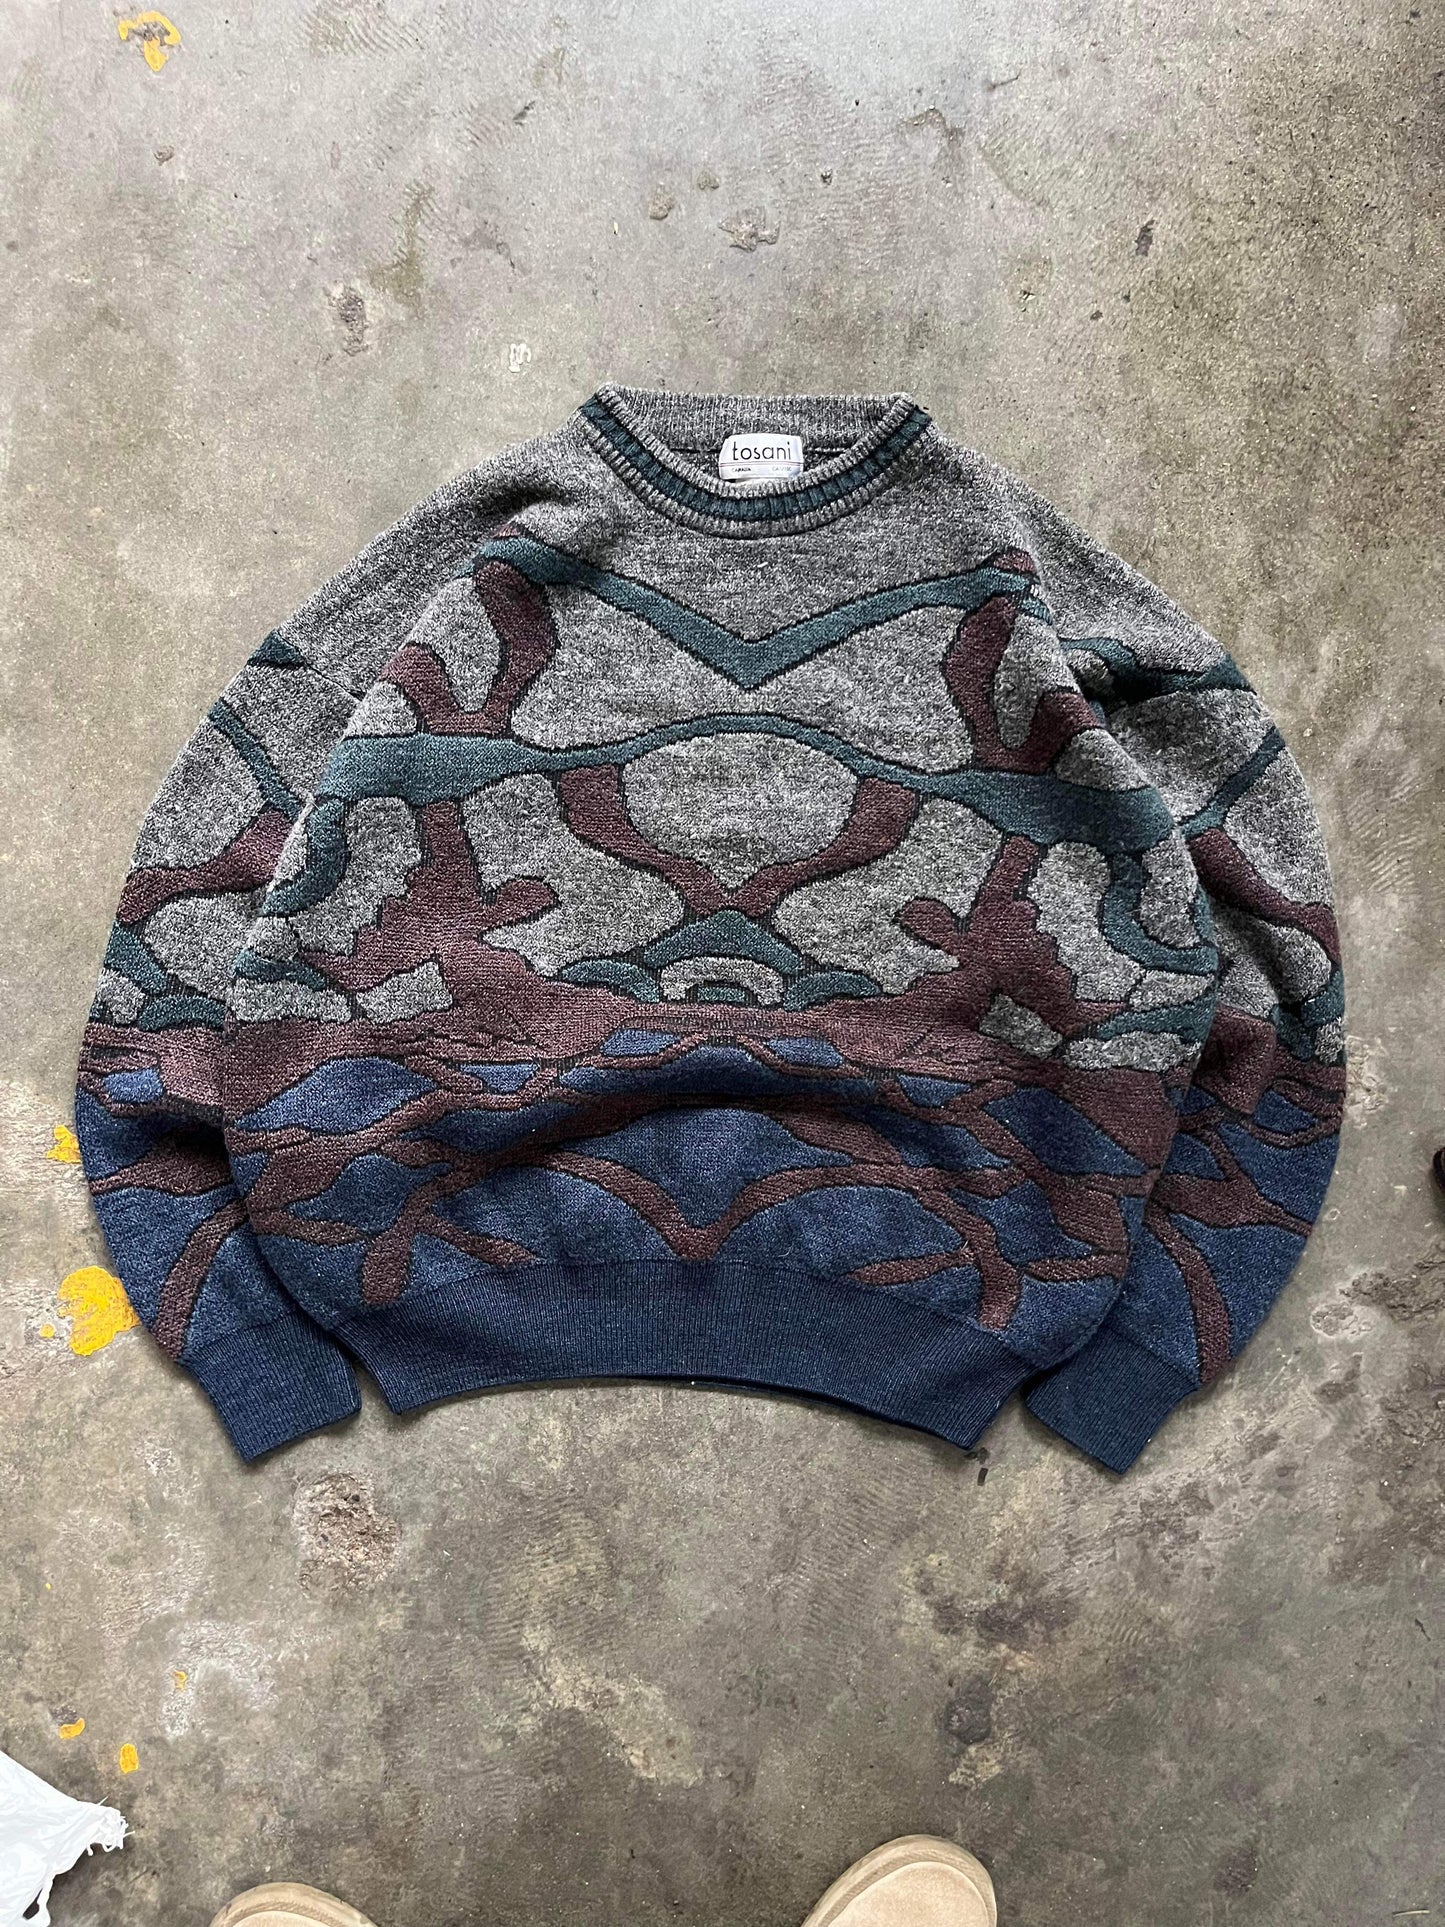 (L) Vintage Textured Abstract Knit